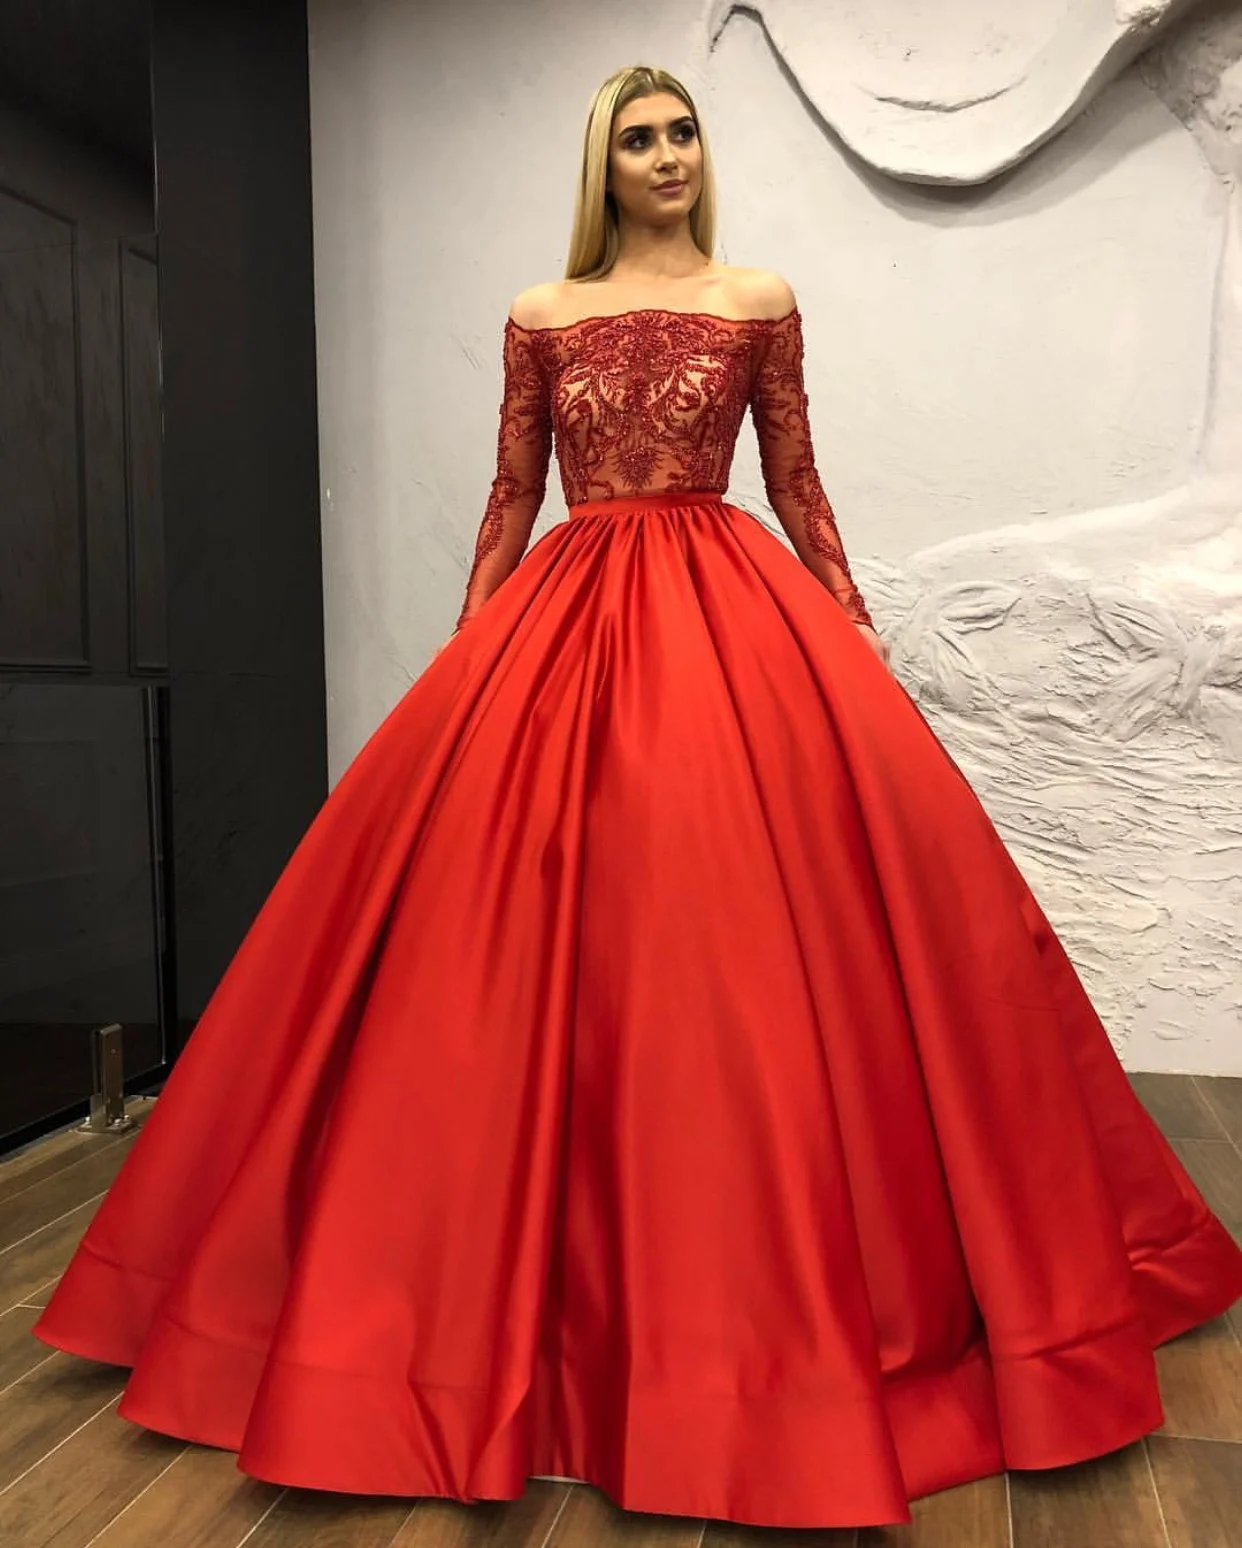 red evening gown long sleeve